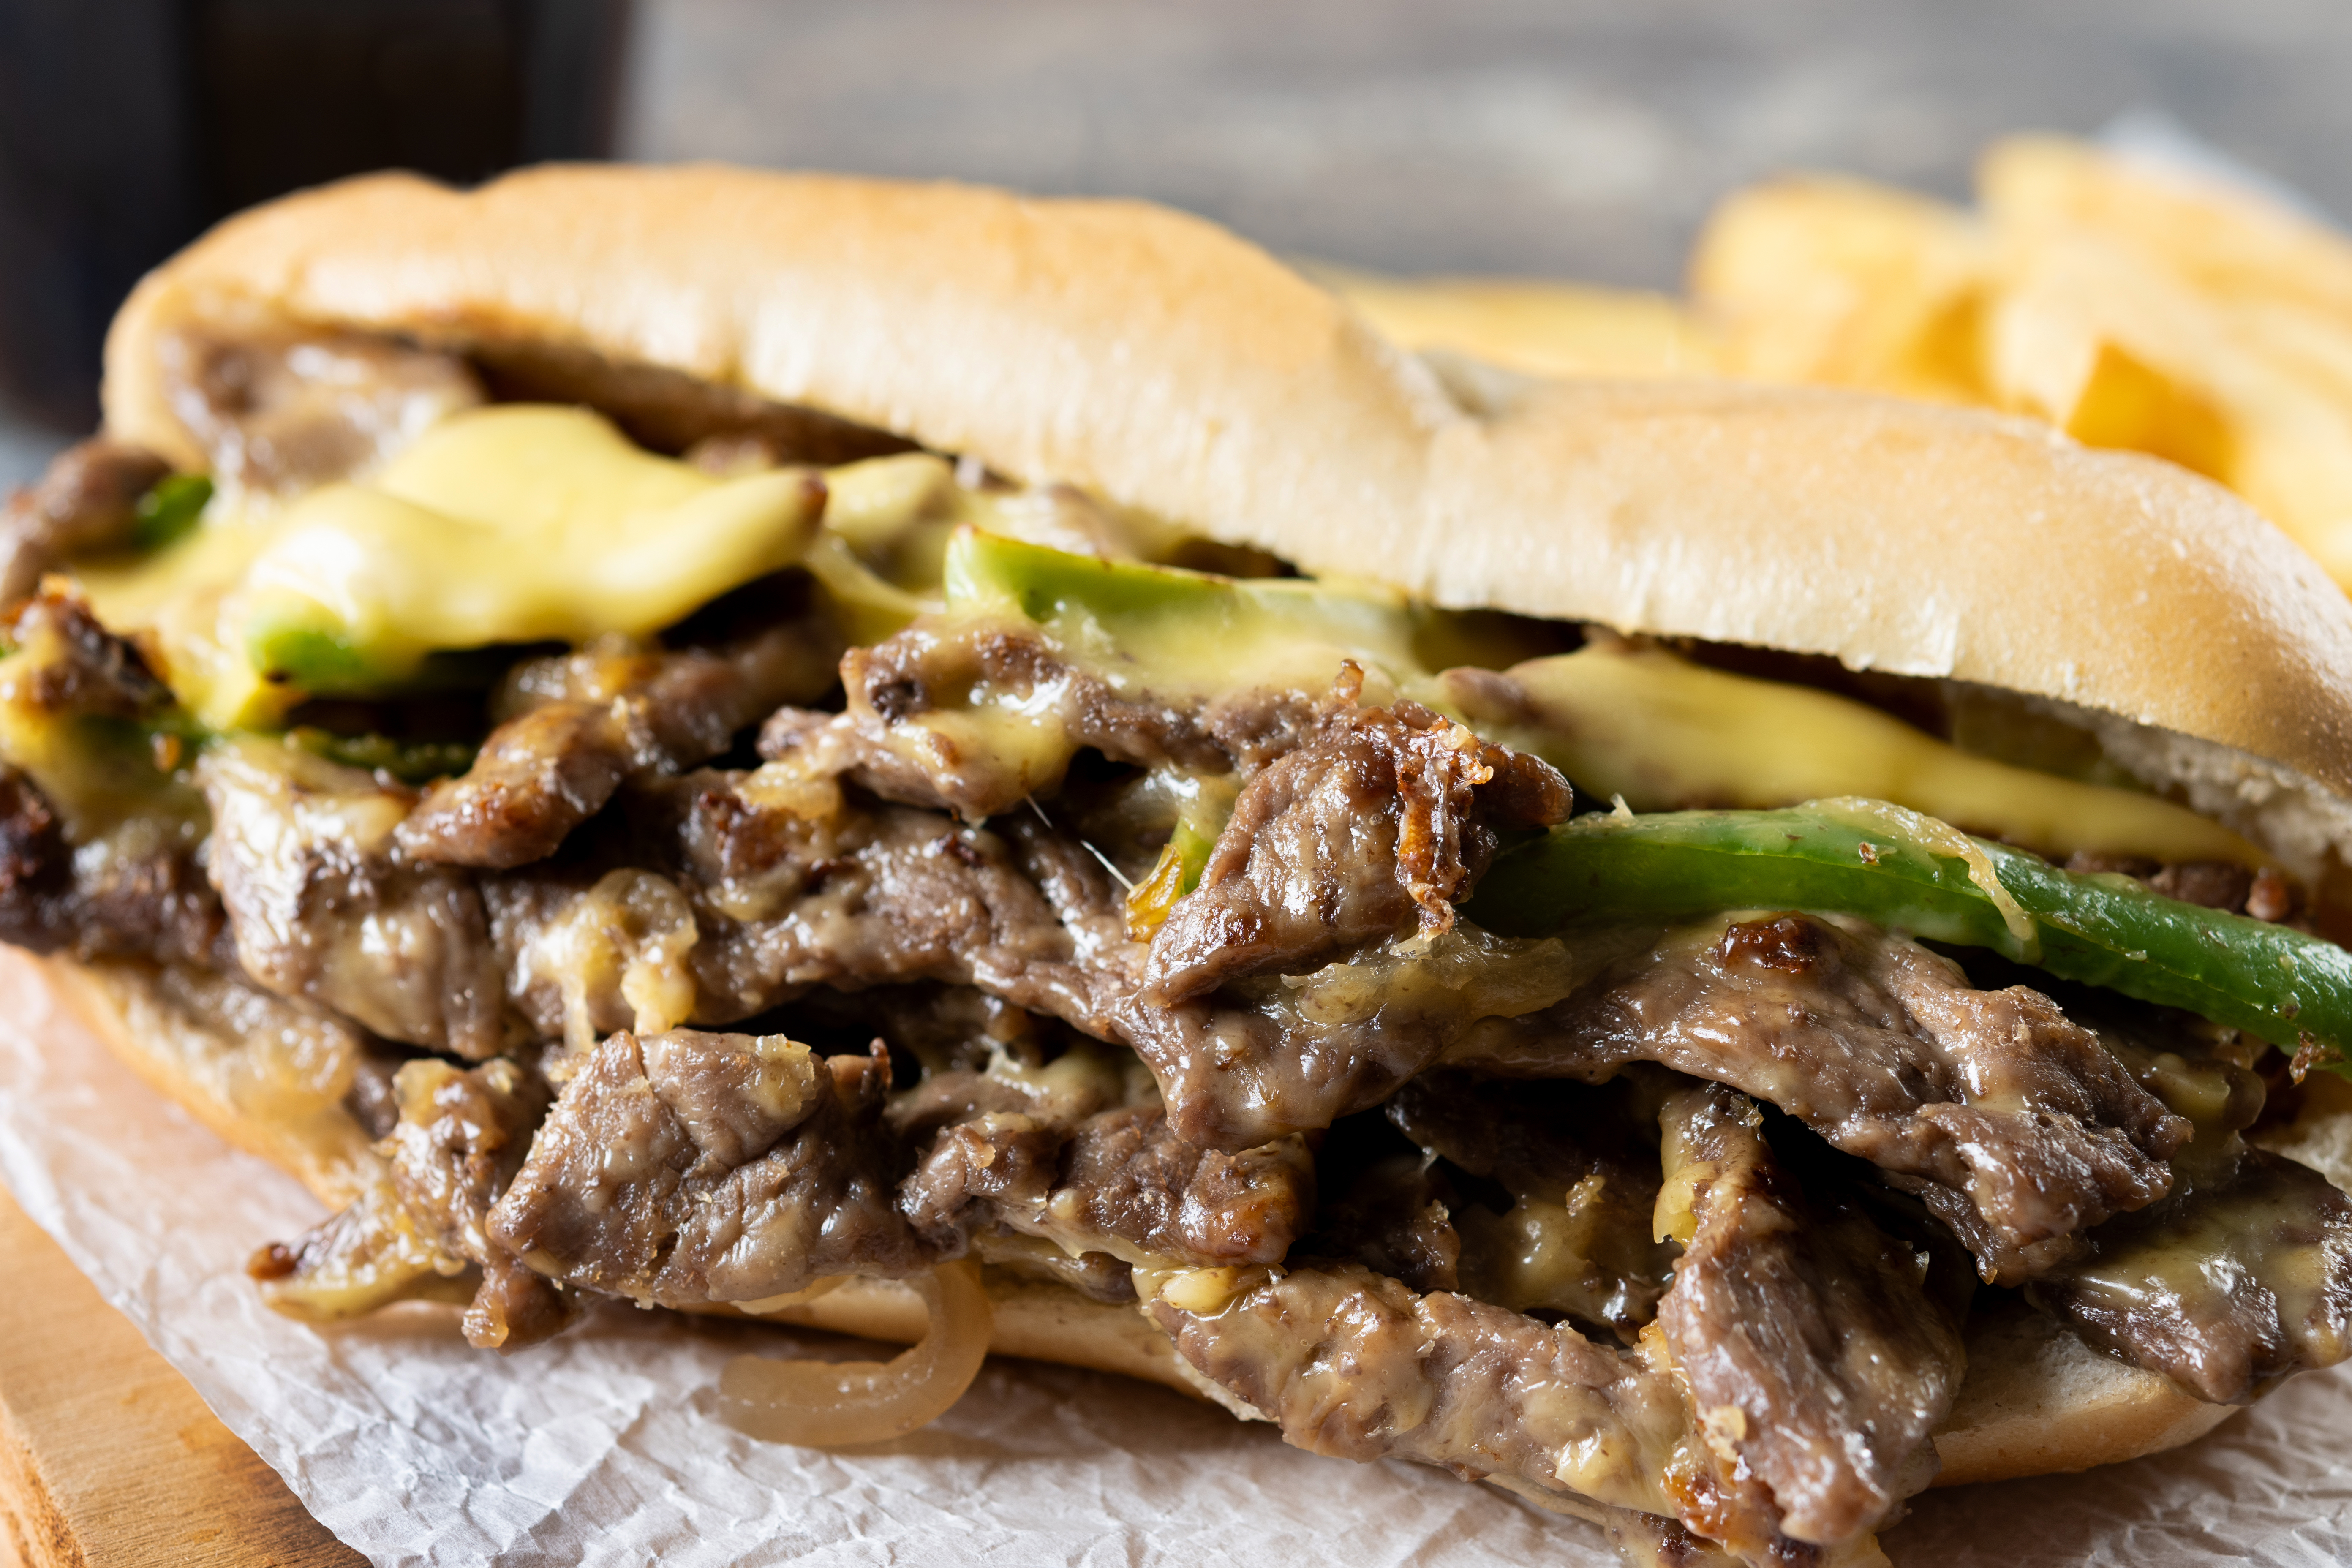 Philly cheesesteak sandwich on wooden table